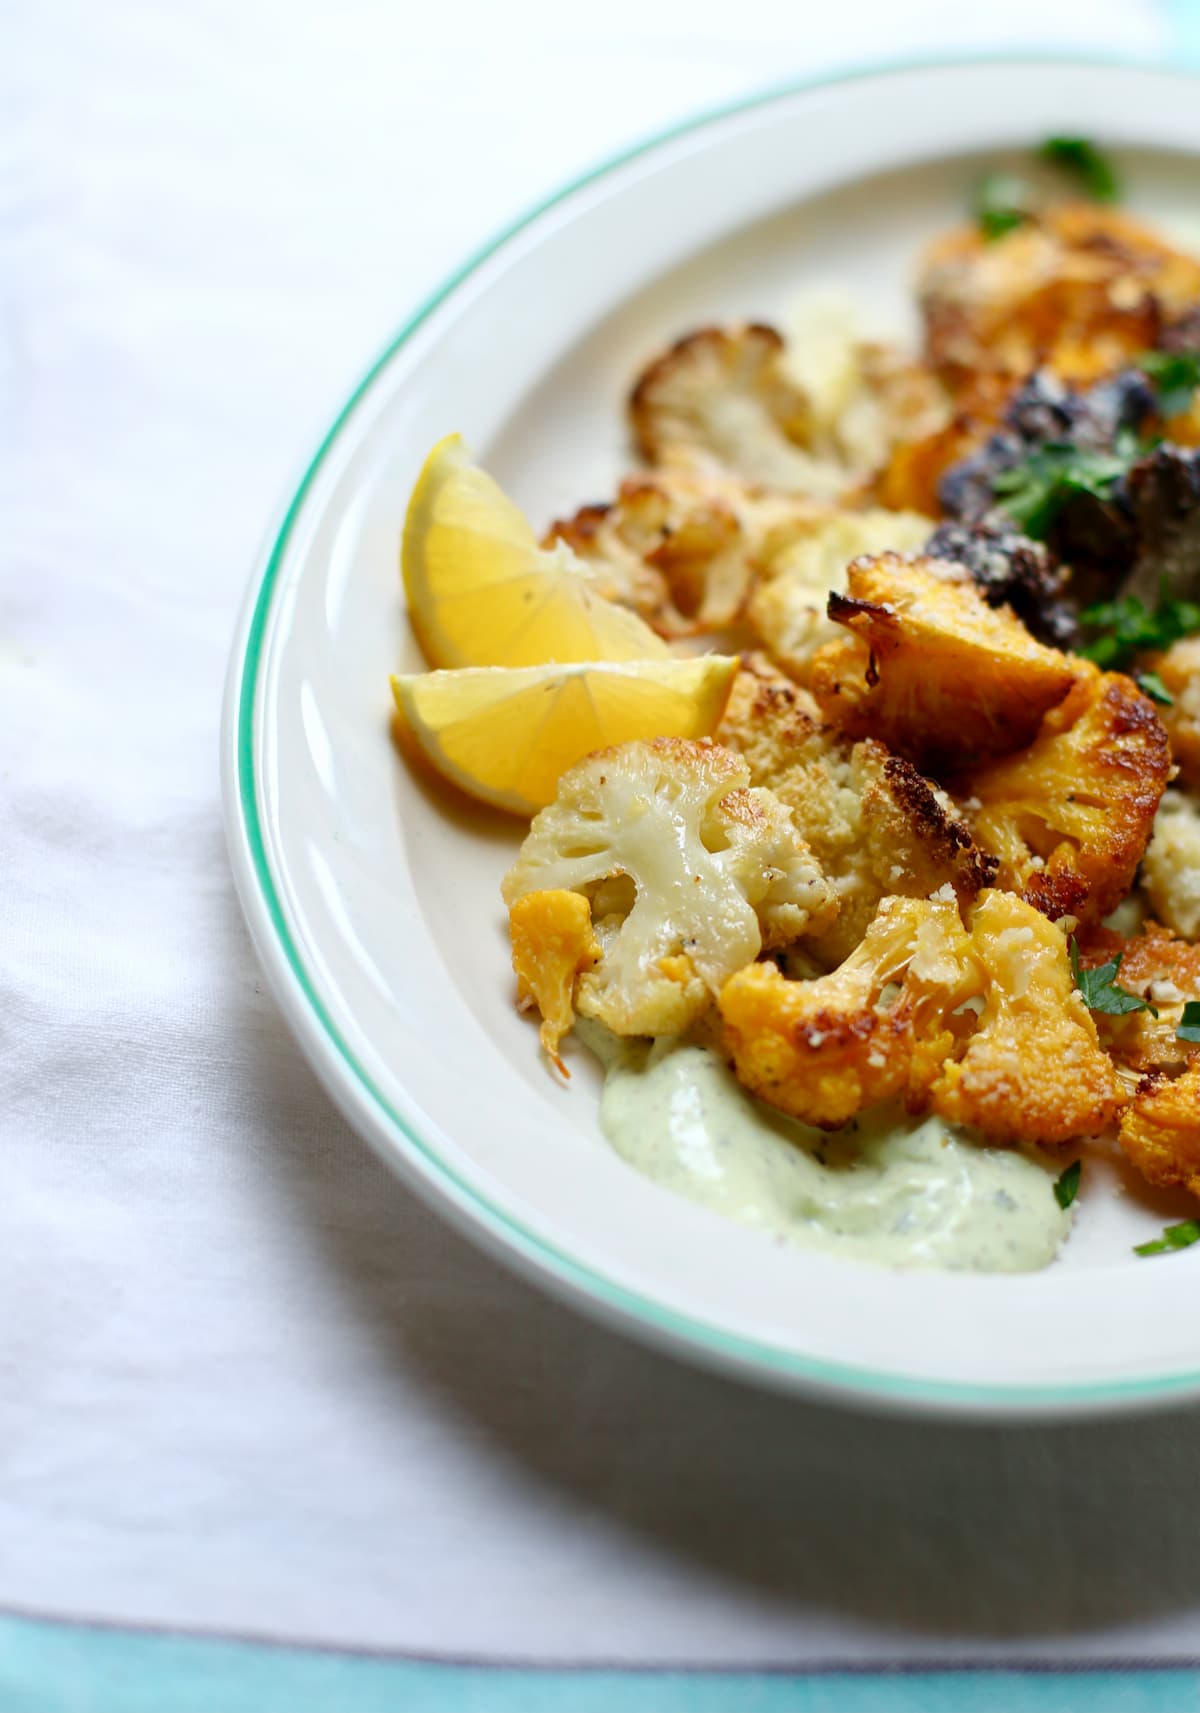 a side shot of a plate of roasted cauliflower with yogurt sauce with a lemon wedge onthe side of the plate.